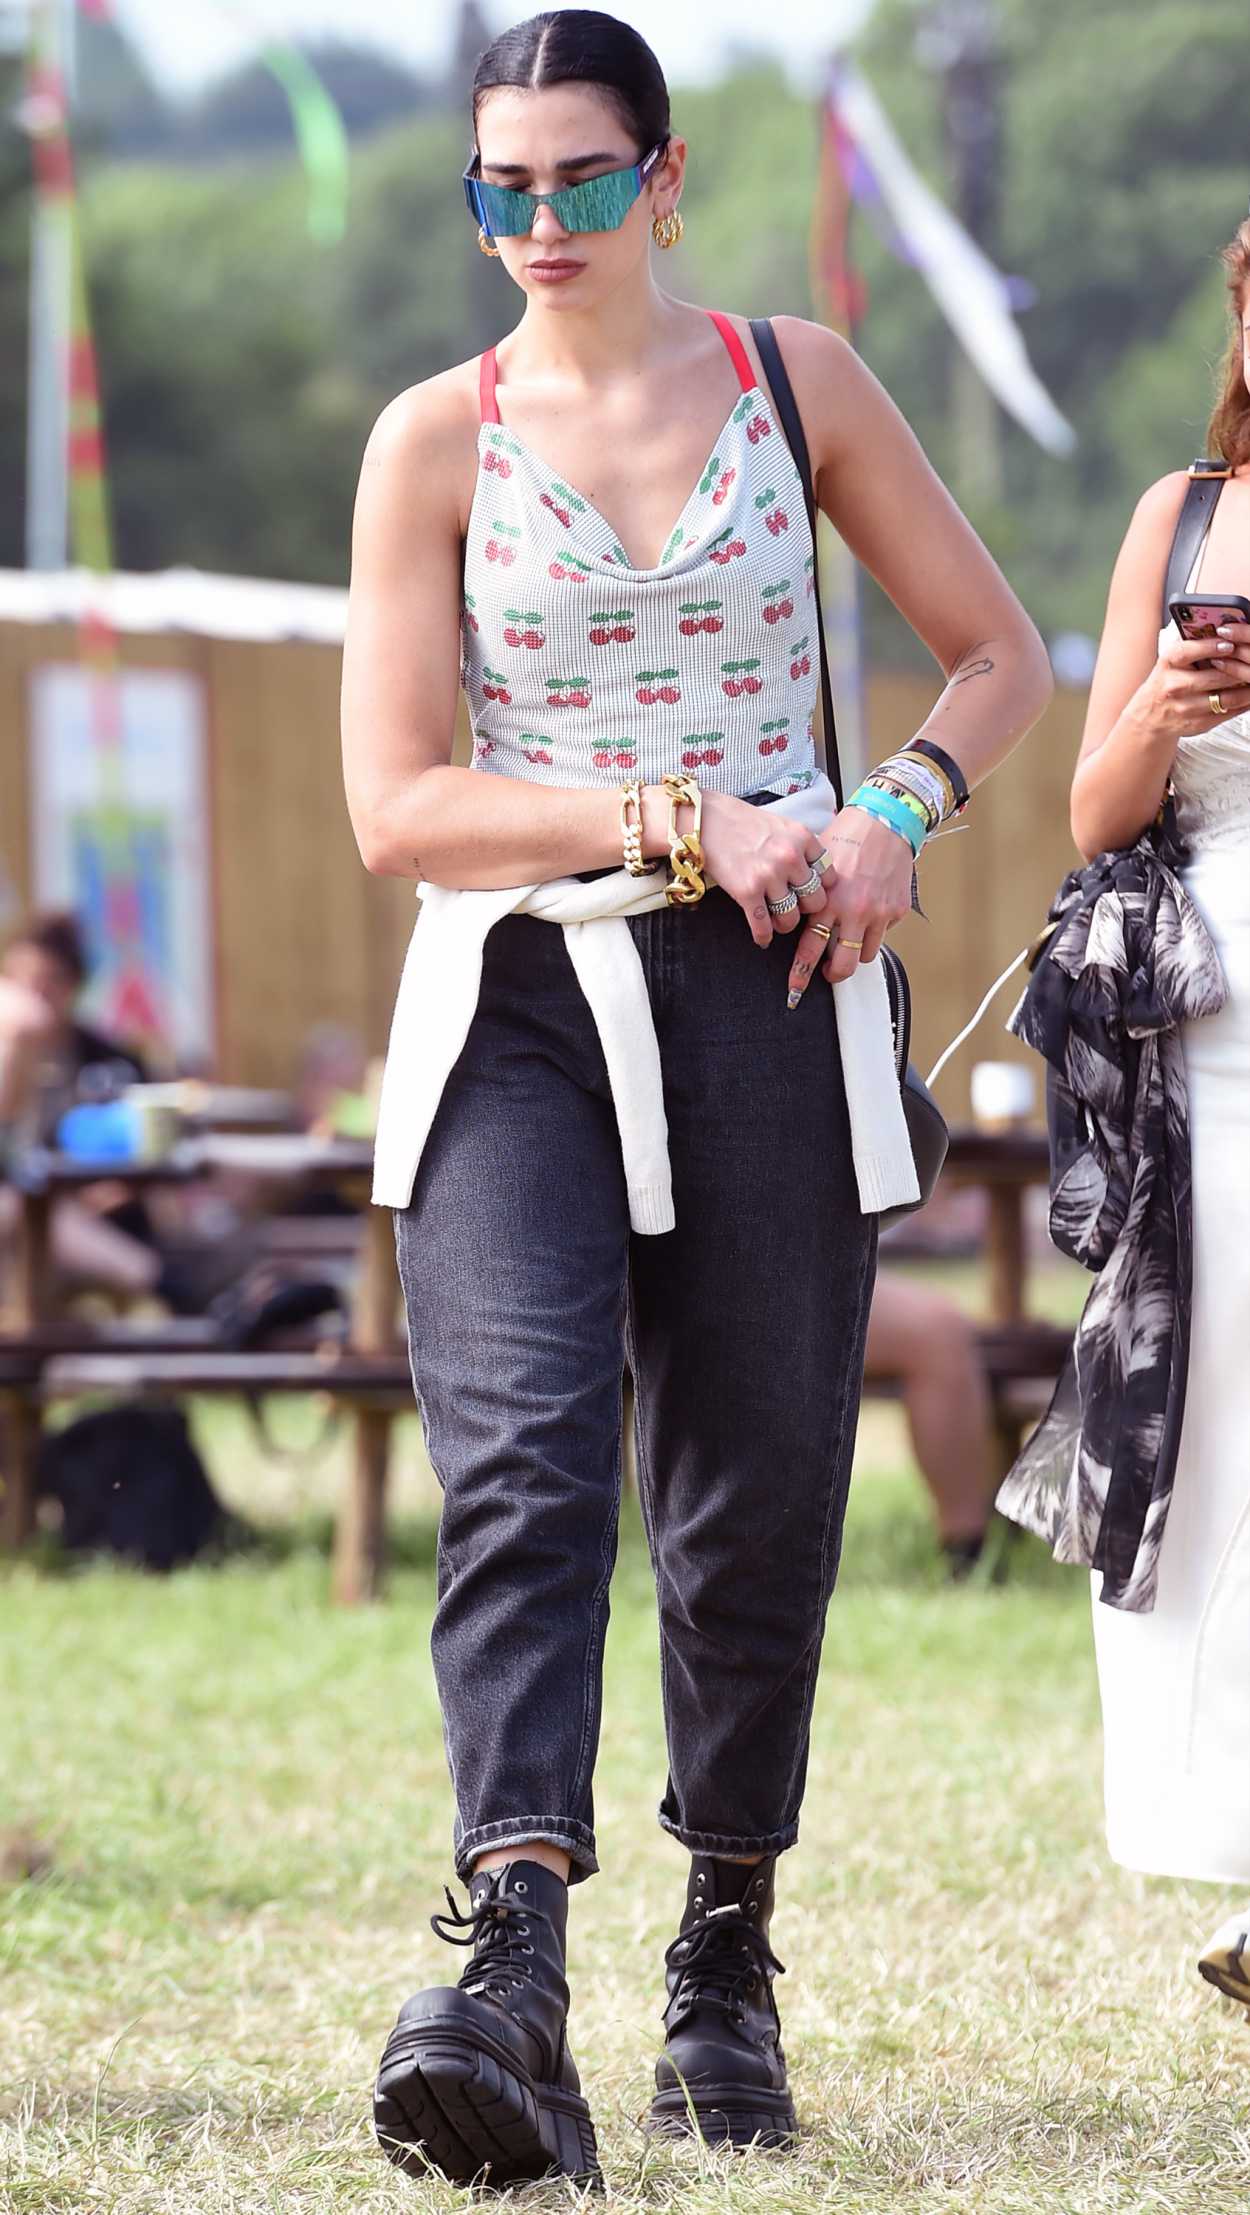 Dua Lipa in a Black Boots Was Spotted in Glastonbury During 2019 Glastonbury Music ...